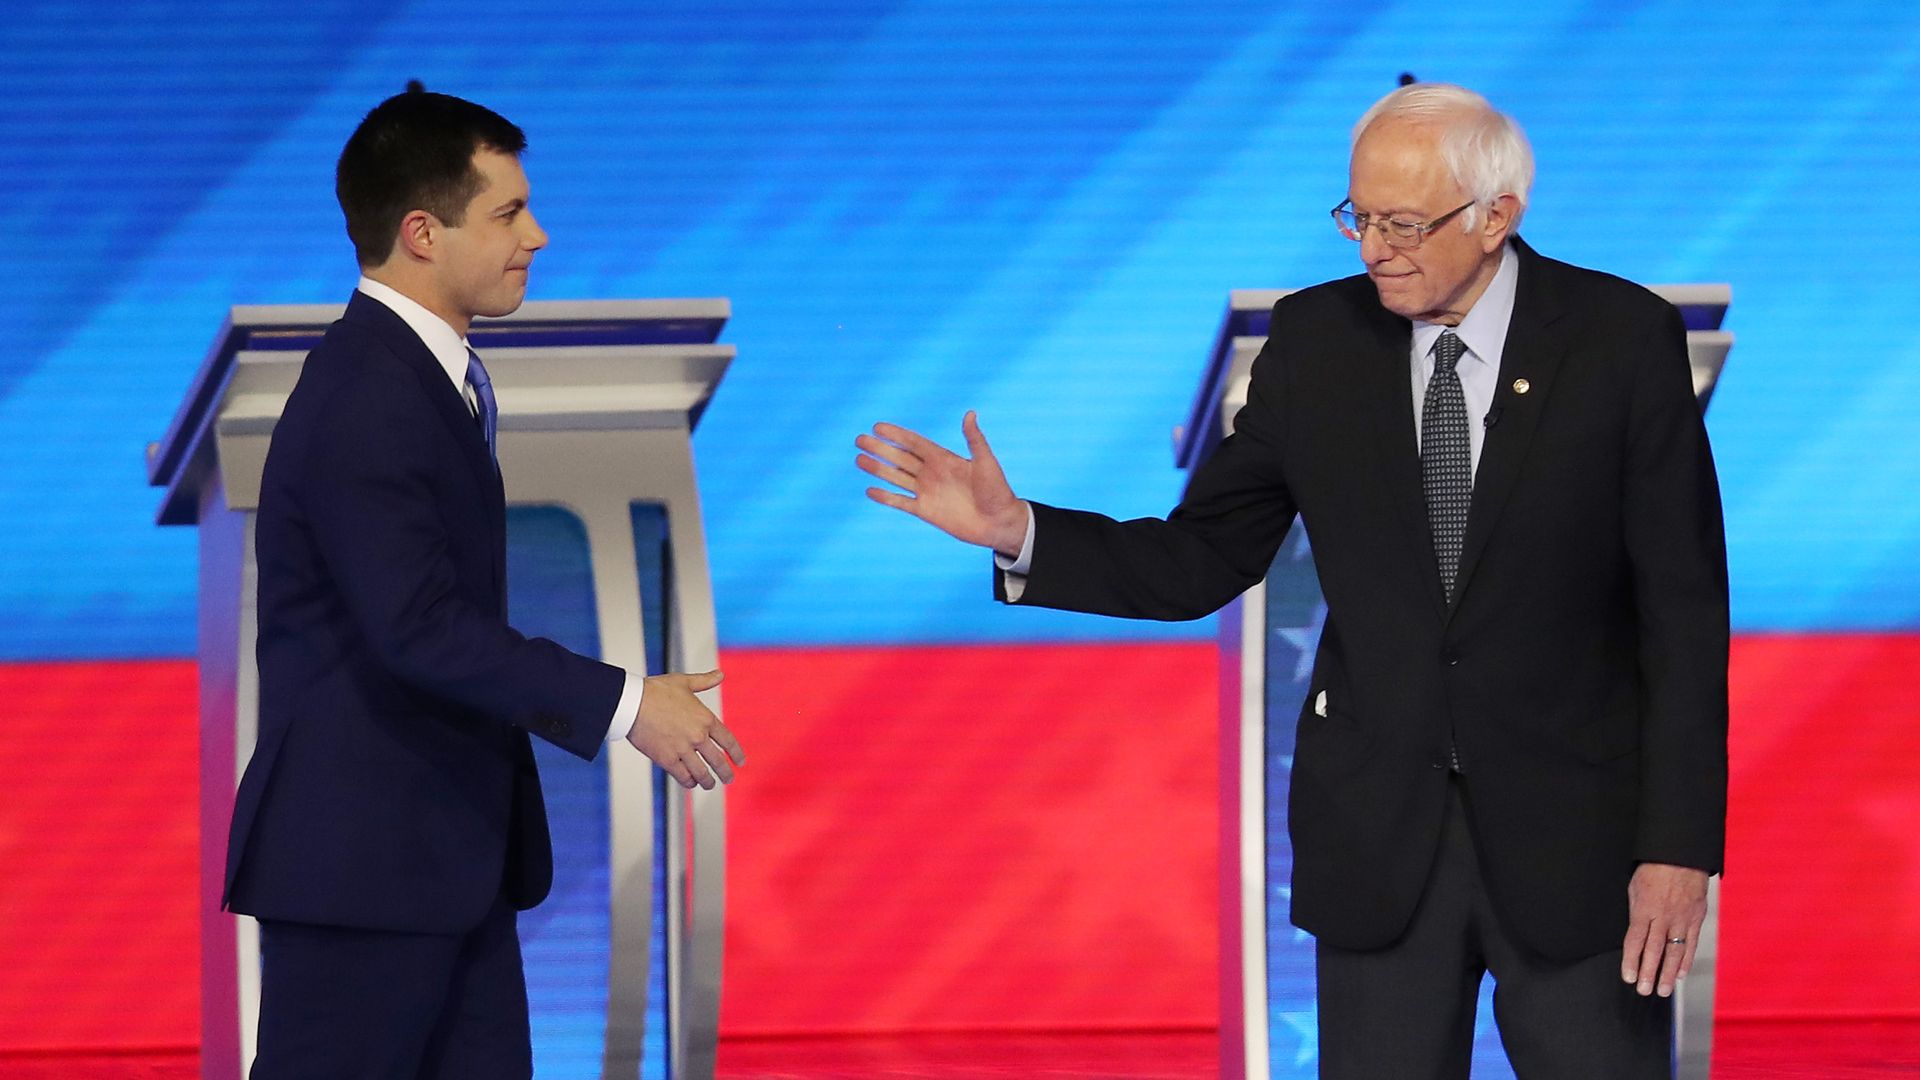 Buttigieg and Sanders going in for a handshake